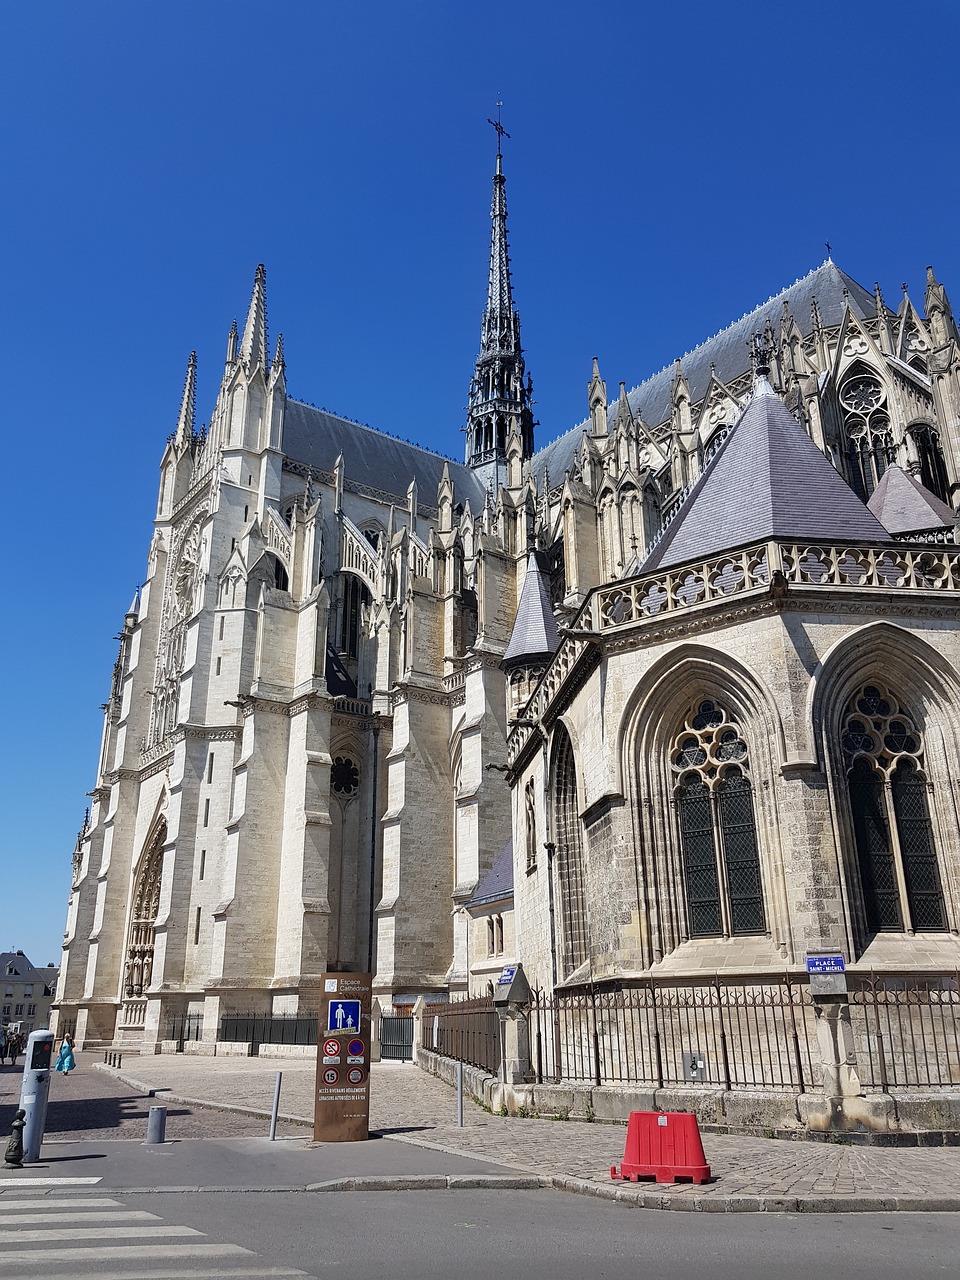 WWI History and Local Cuisine in Amiens